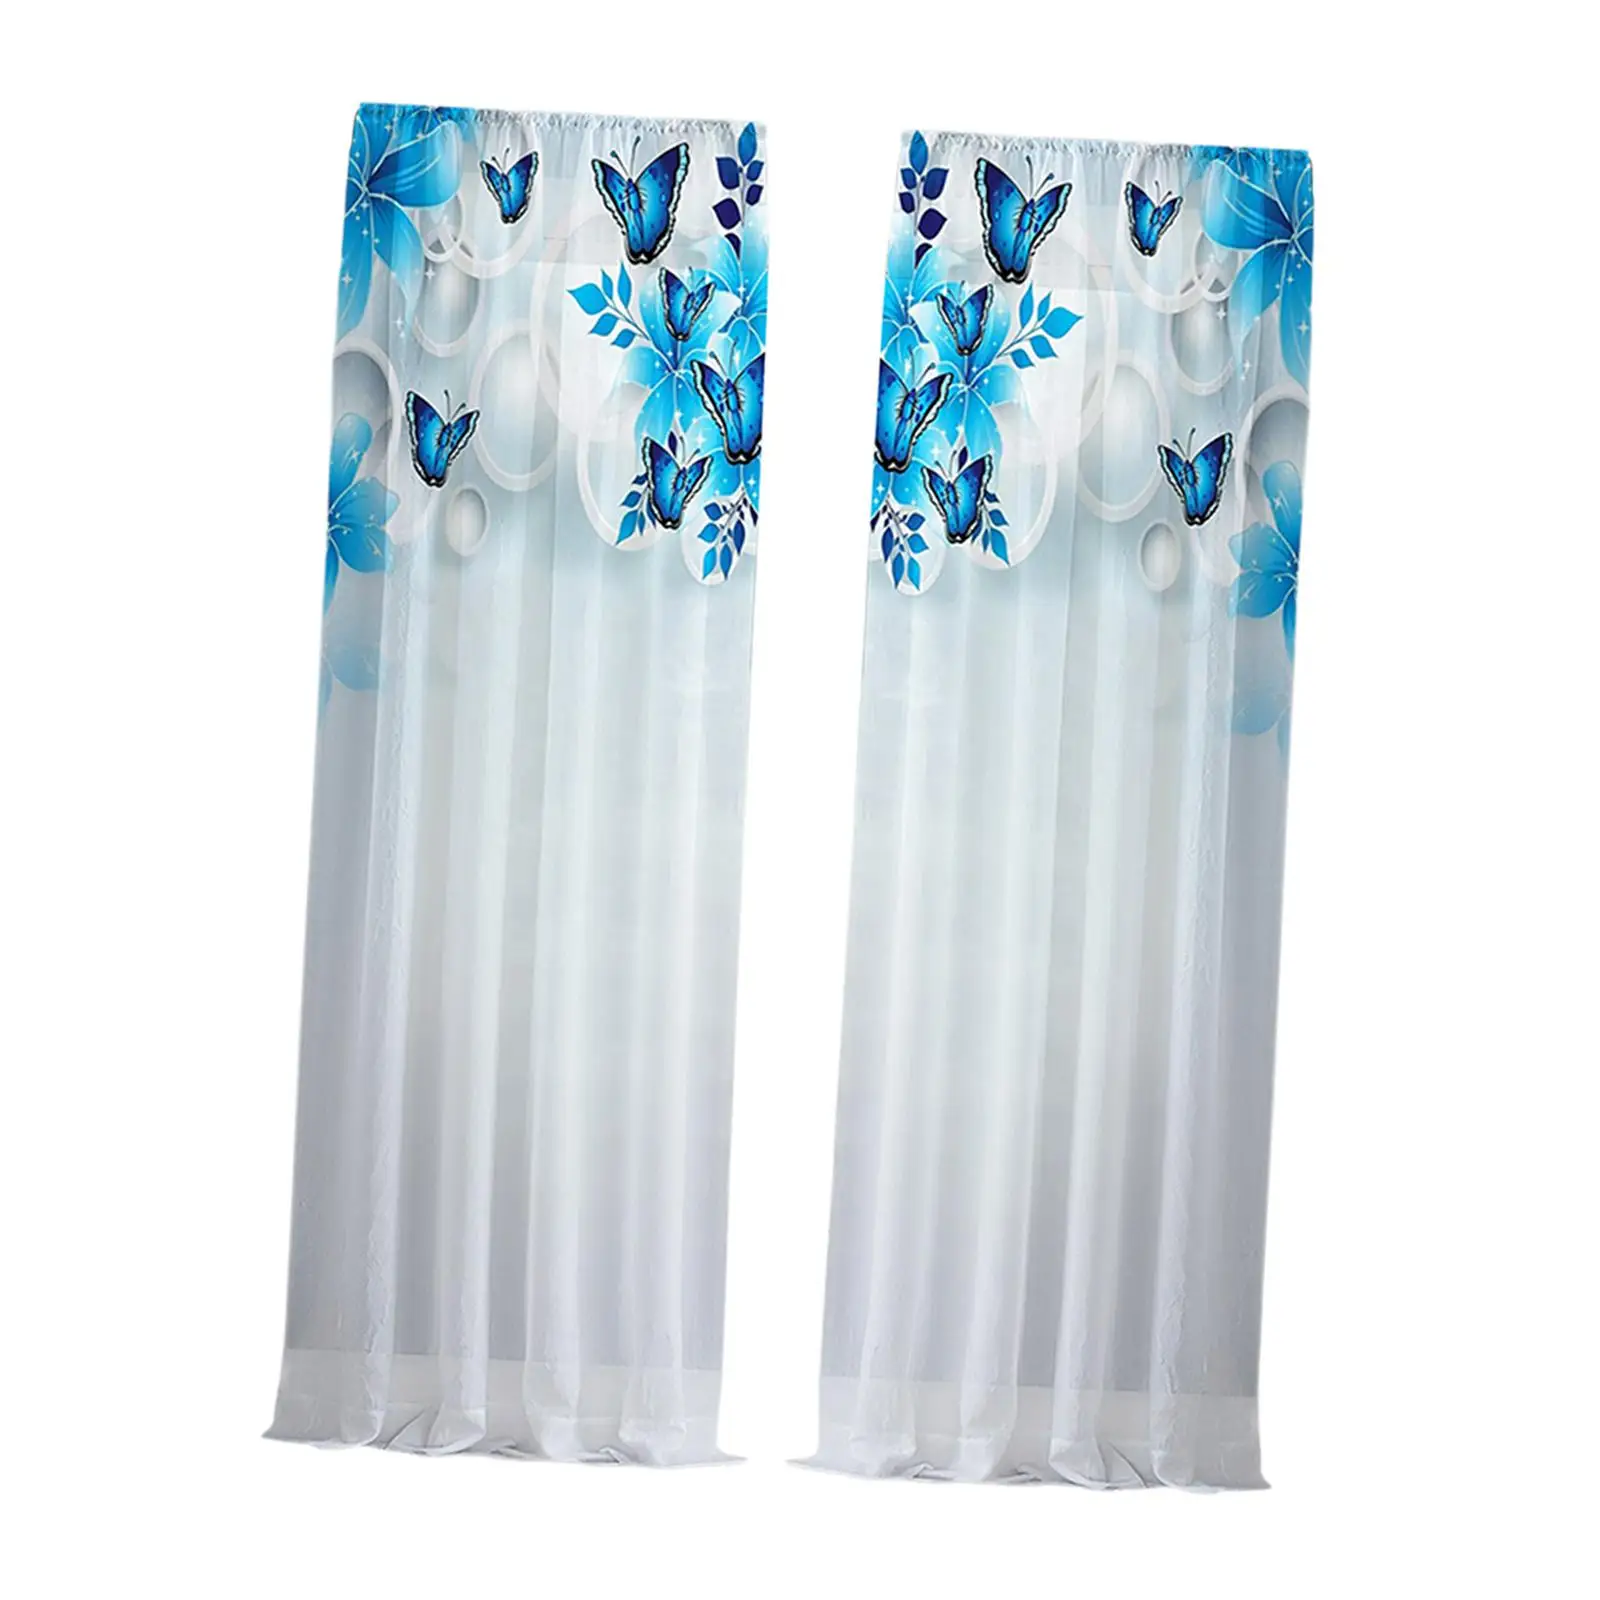 Blue Butterfly Digital Printing Sheer Curtain Easily Install and Slide Sturdy Light Filtering for Living Room Decoration